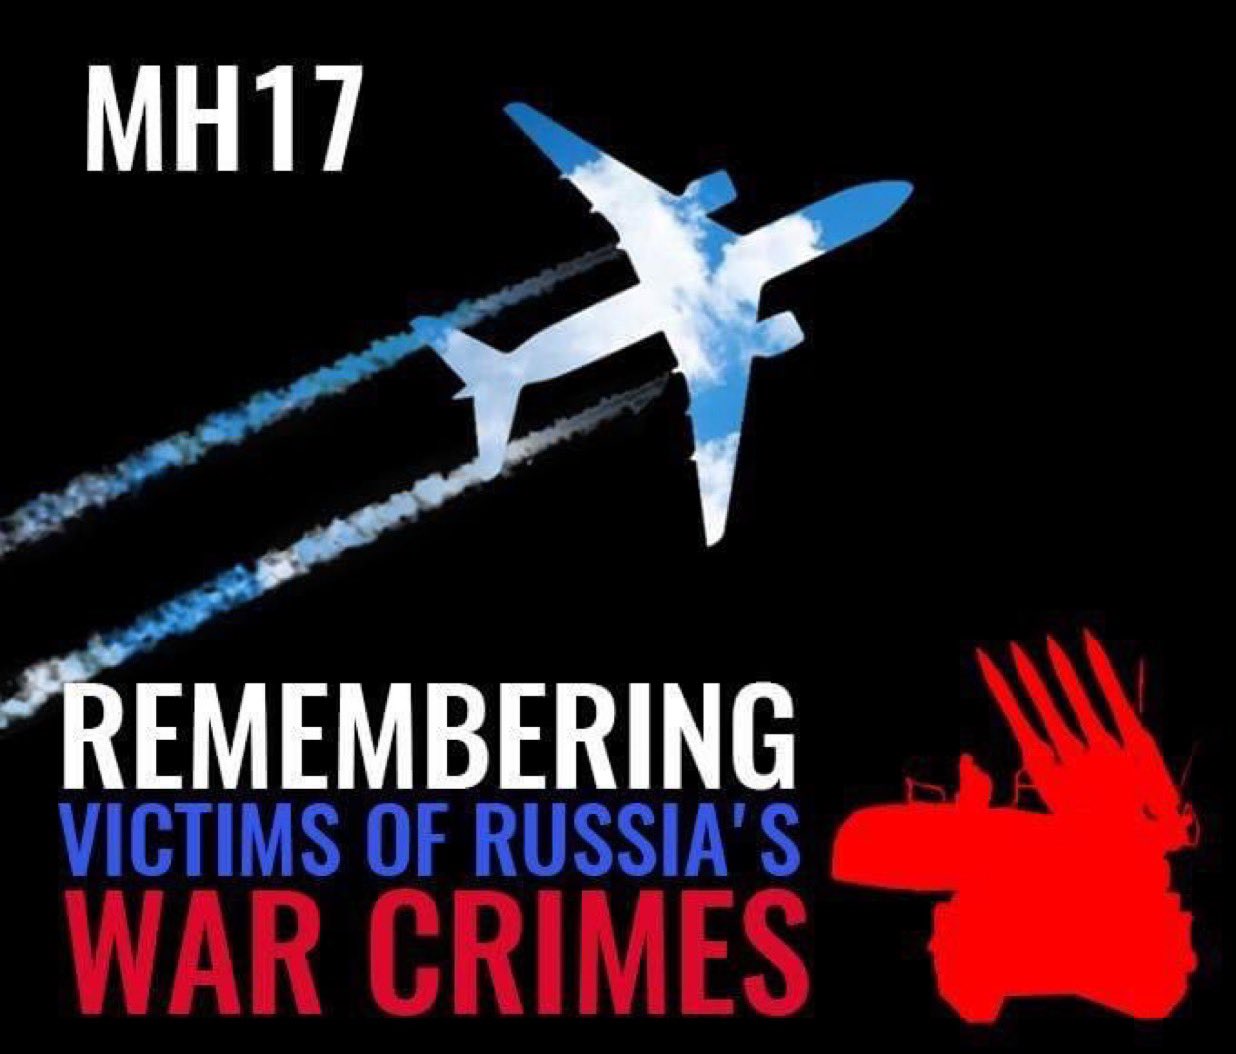 Shame on Stuff New Zealand for Disrespecting the 298 Civilian Victims on Flight MH17 Shot Down on 17 July 2014 by a Russian Missile over Eastern Ukraine.